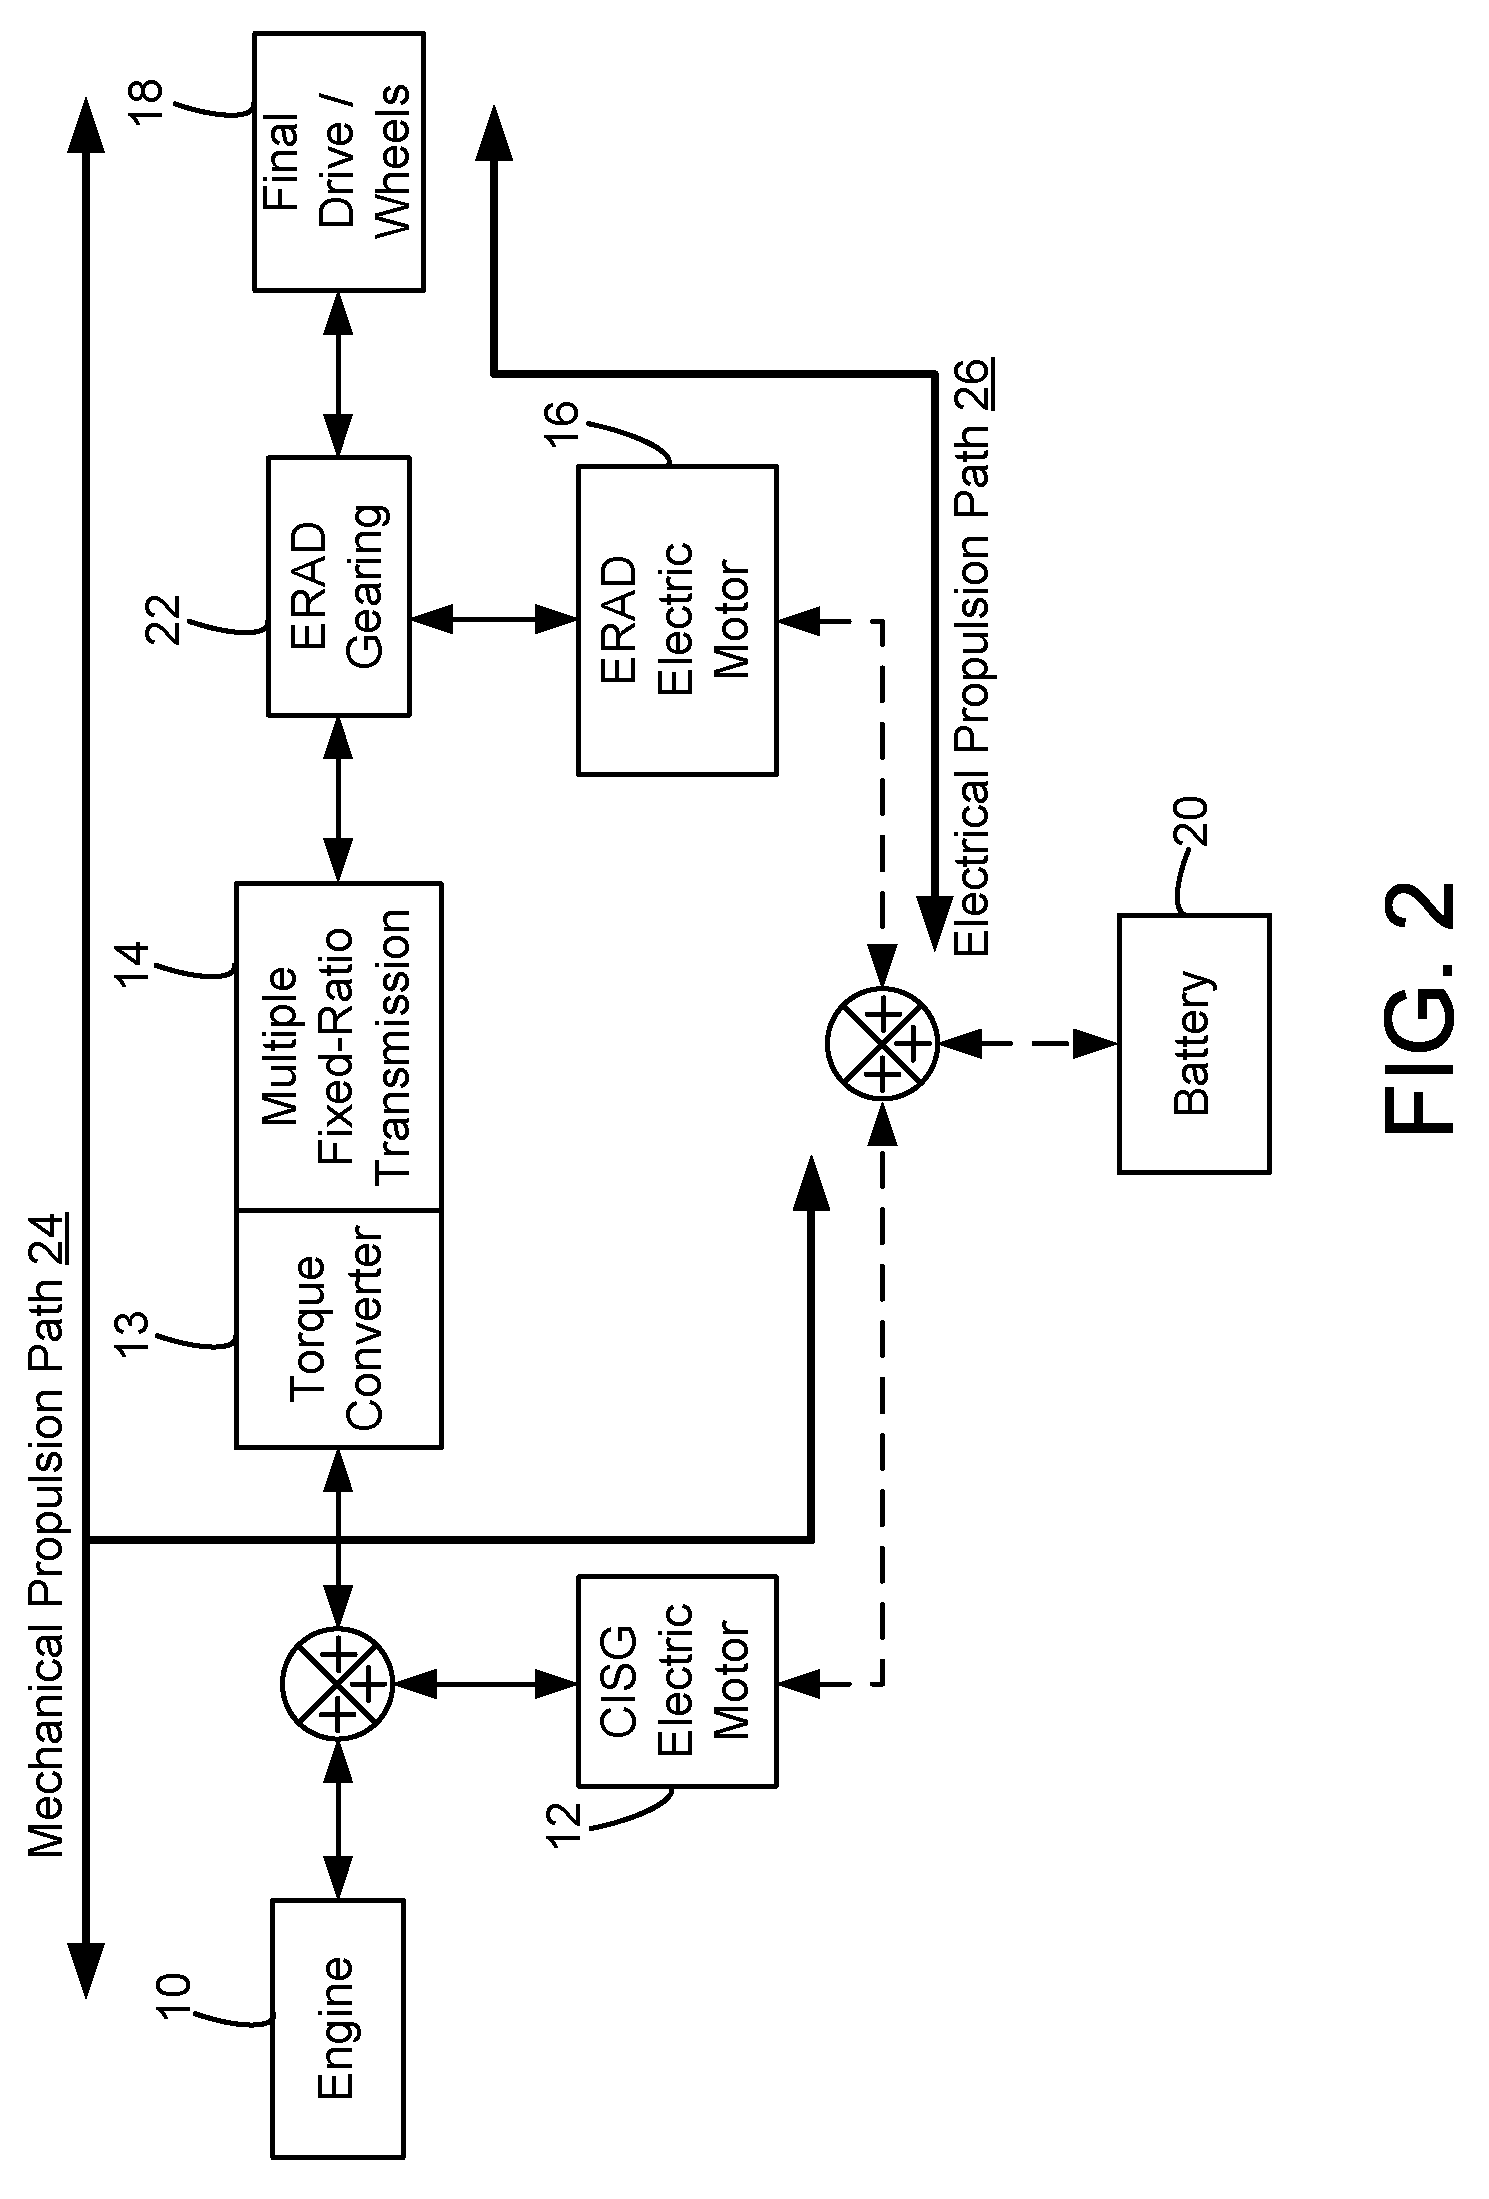 System and method of torque converter lockup state adjustment using an electric energy conversion device